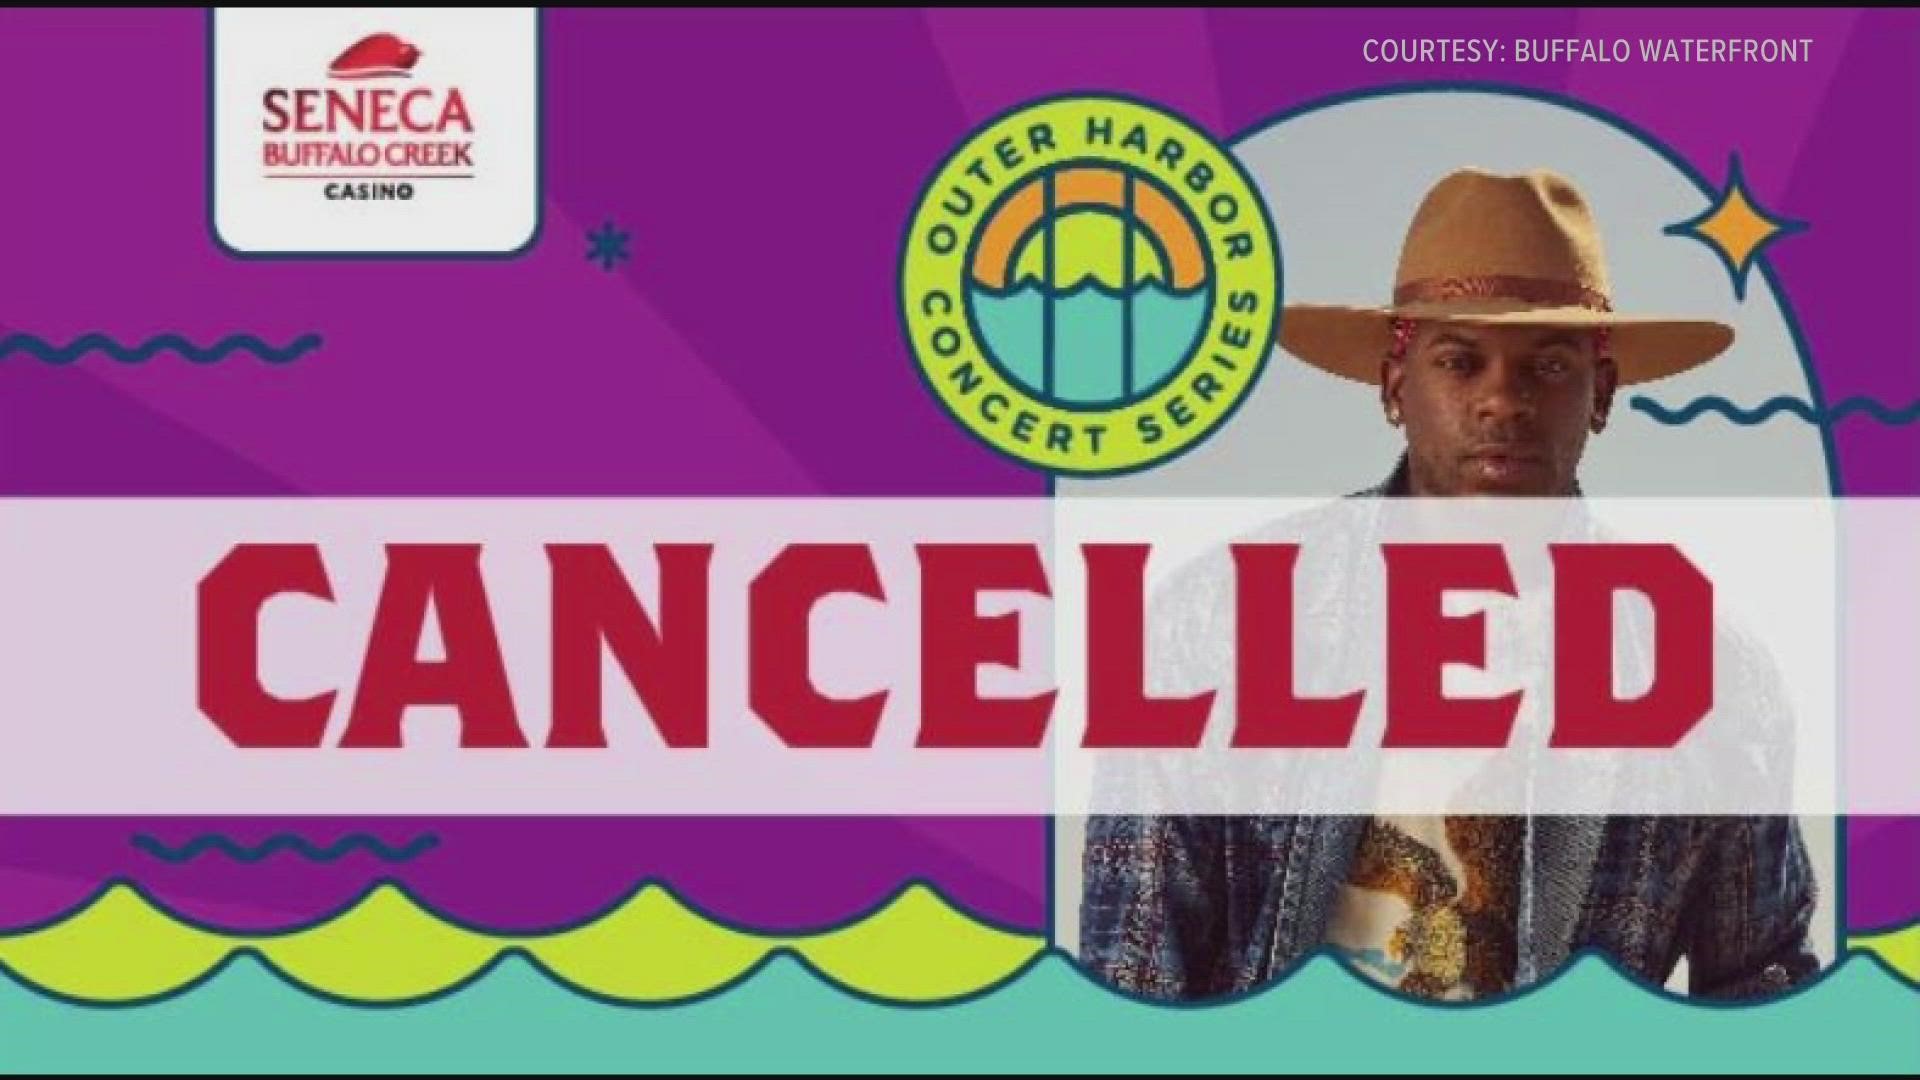 In a Facebook post, the Buffalo Waterfront said they made the difficult decision of canceling the concert and are sorry for disappointing any fans with the decision.